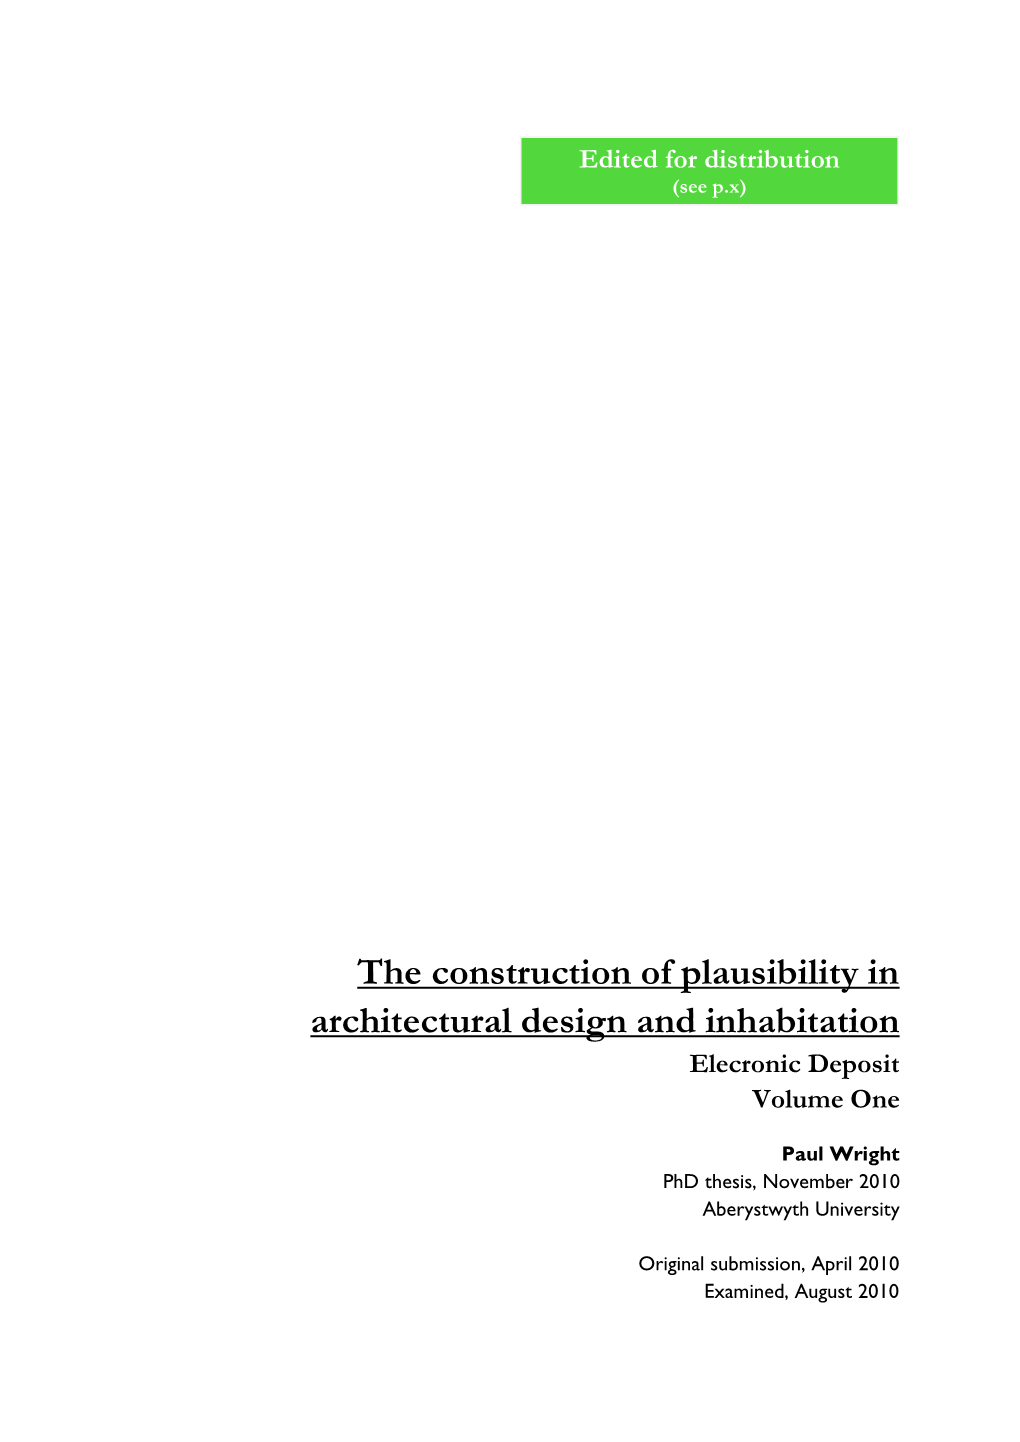 The Construction of Plausibility in Architectural Design and Inhabitation Elecronic Deposit Volume One